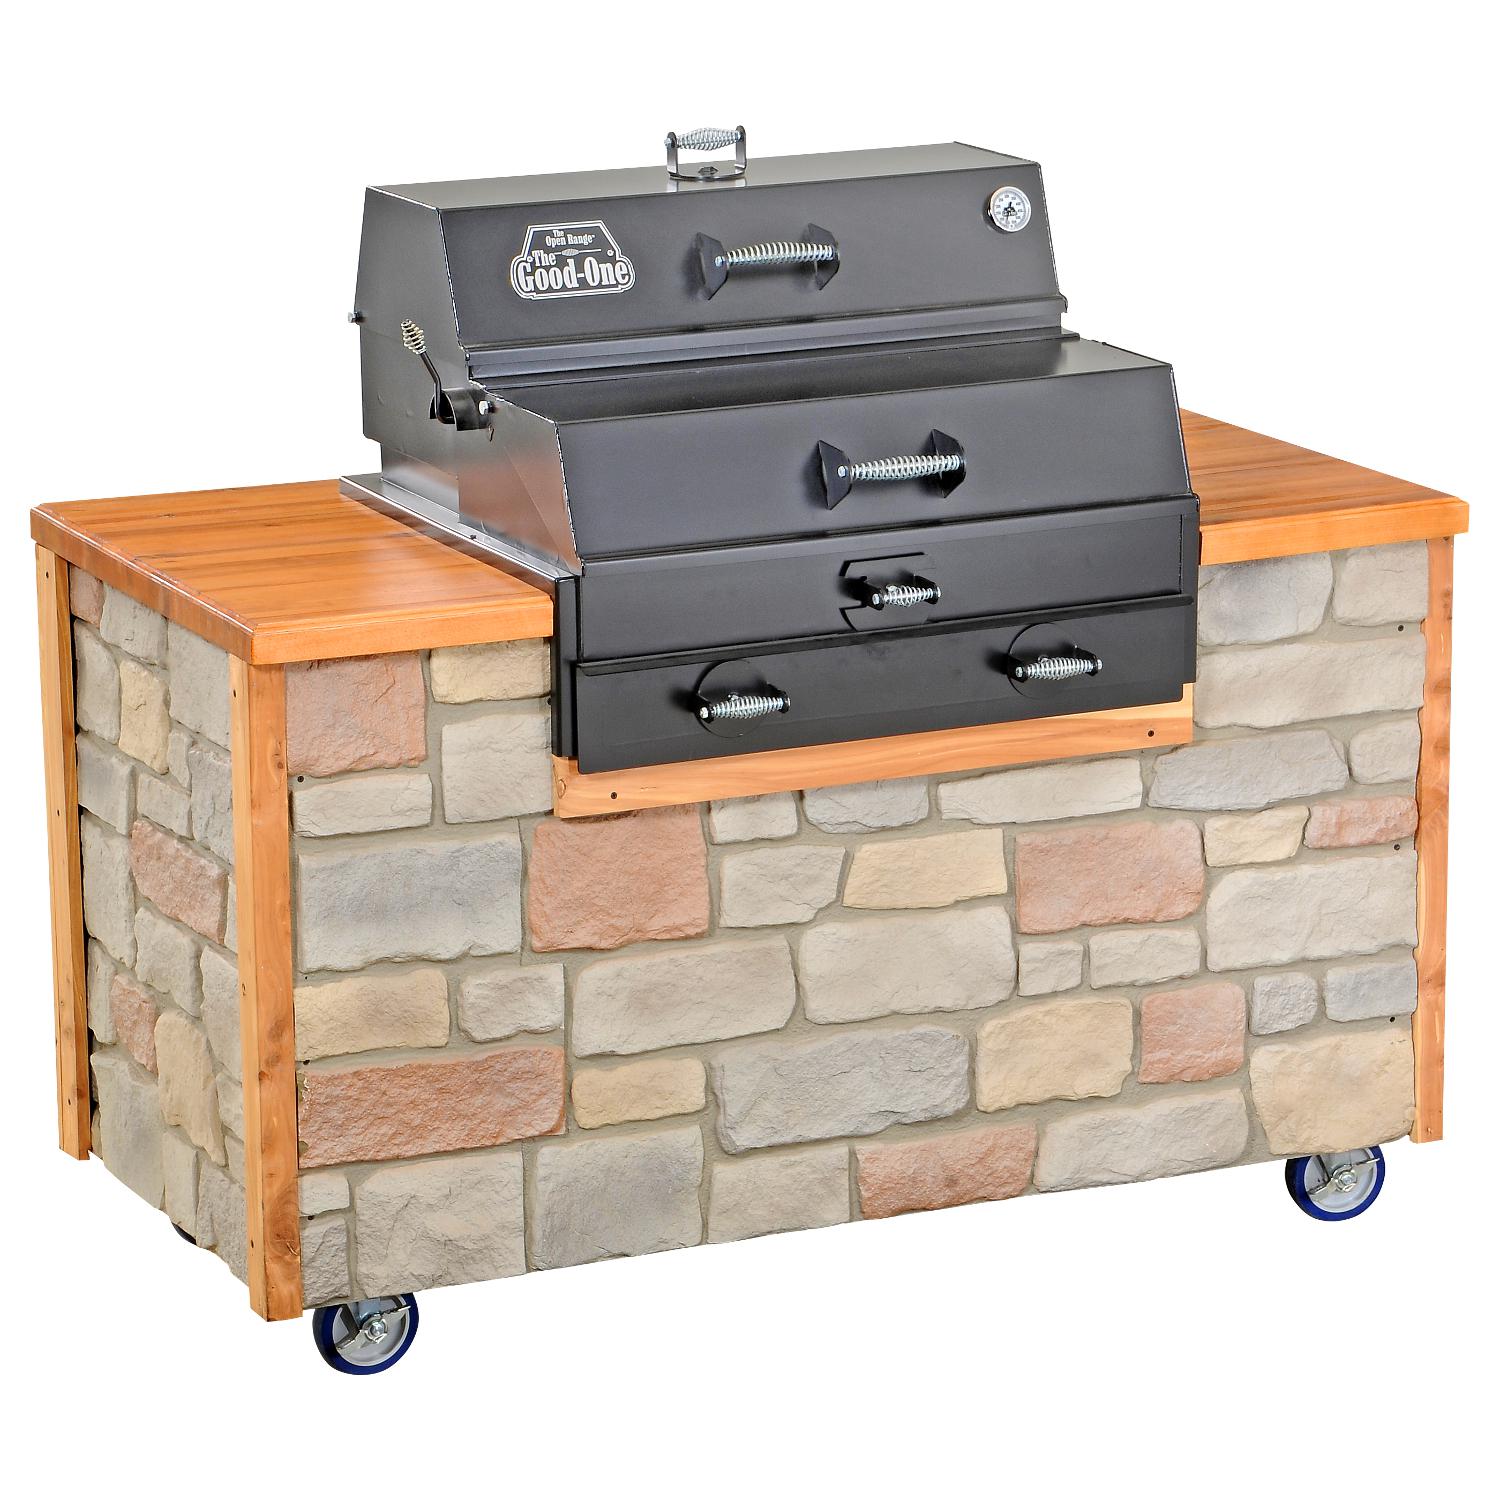 The Best Small Grills For Limited Open Spaces